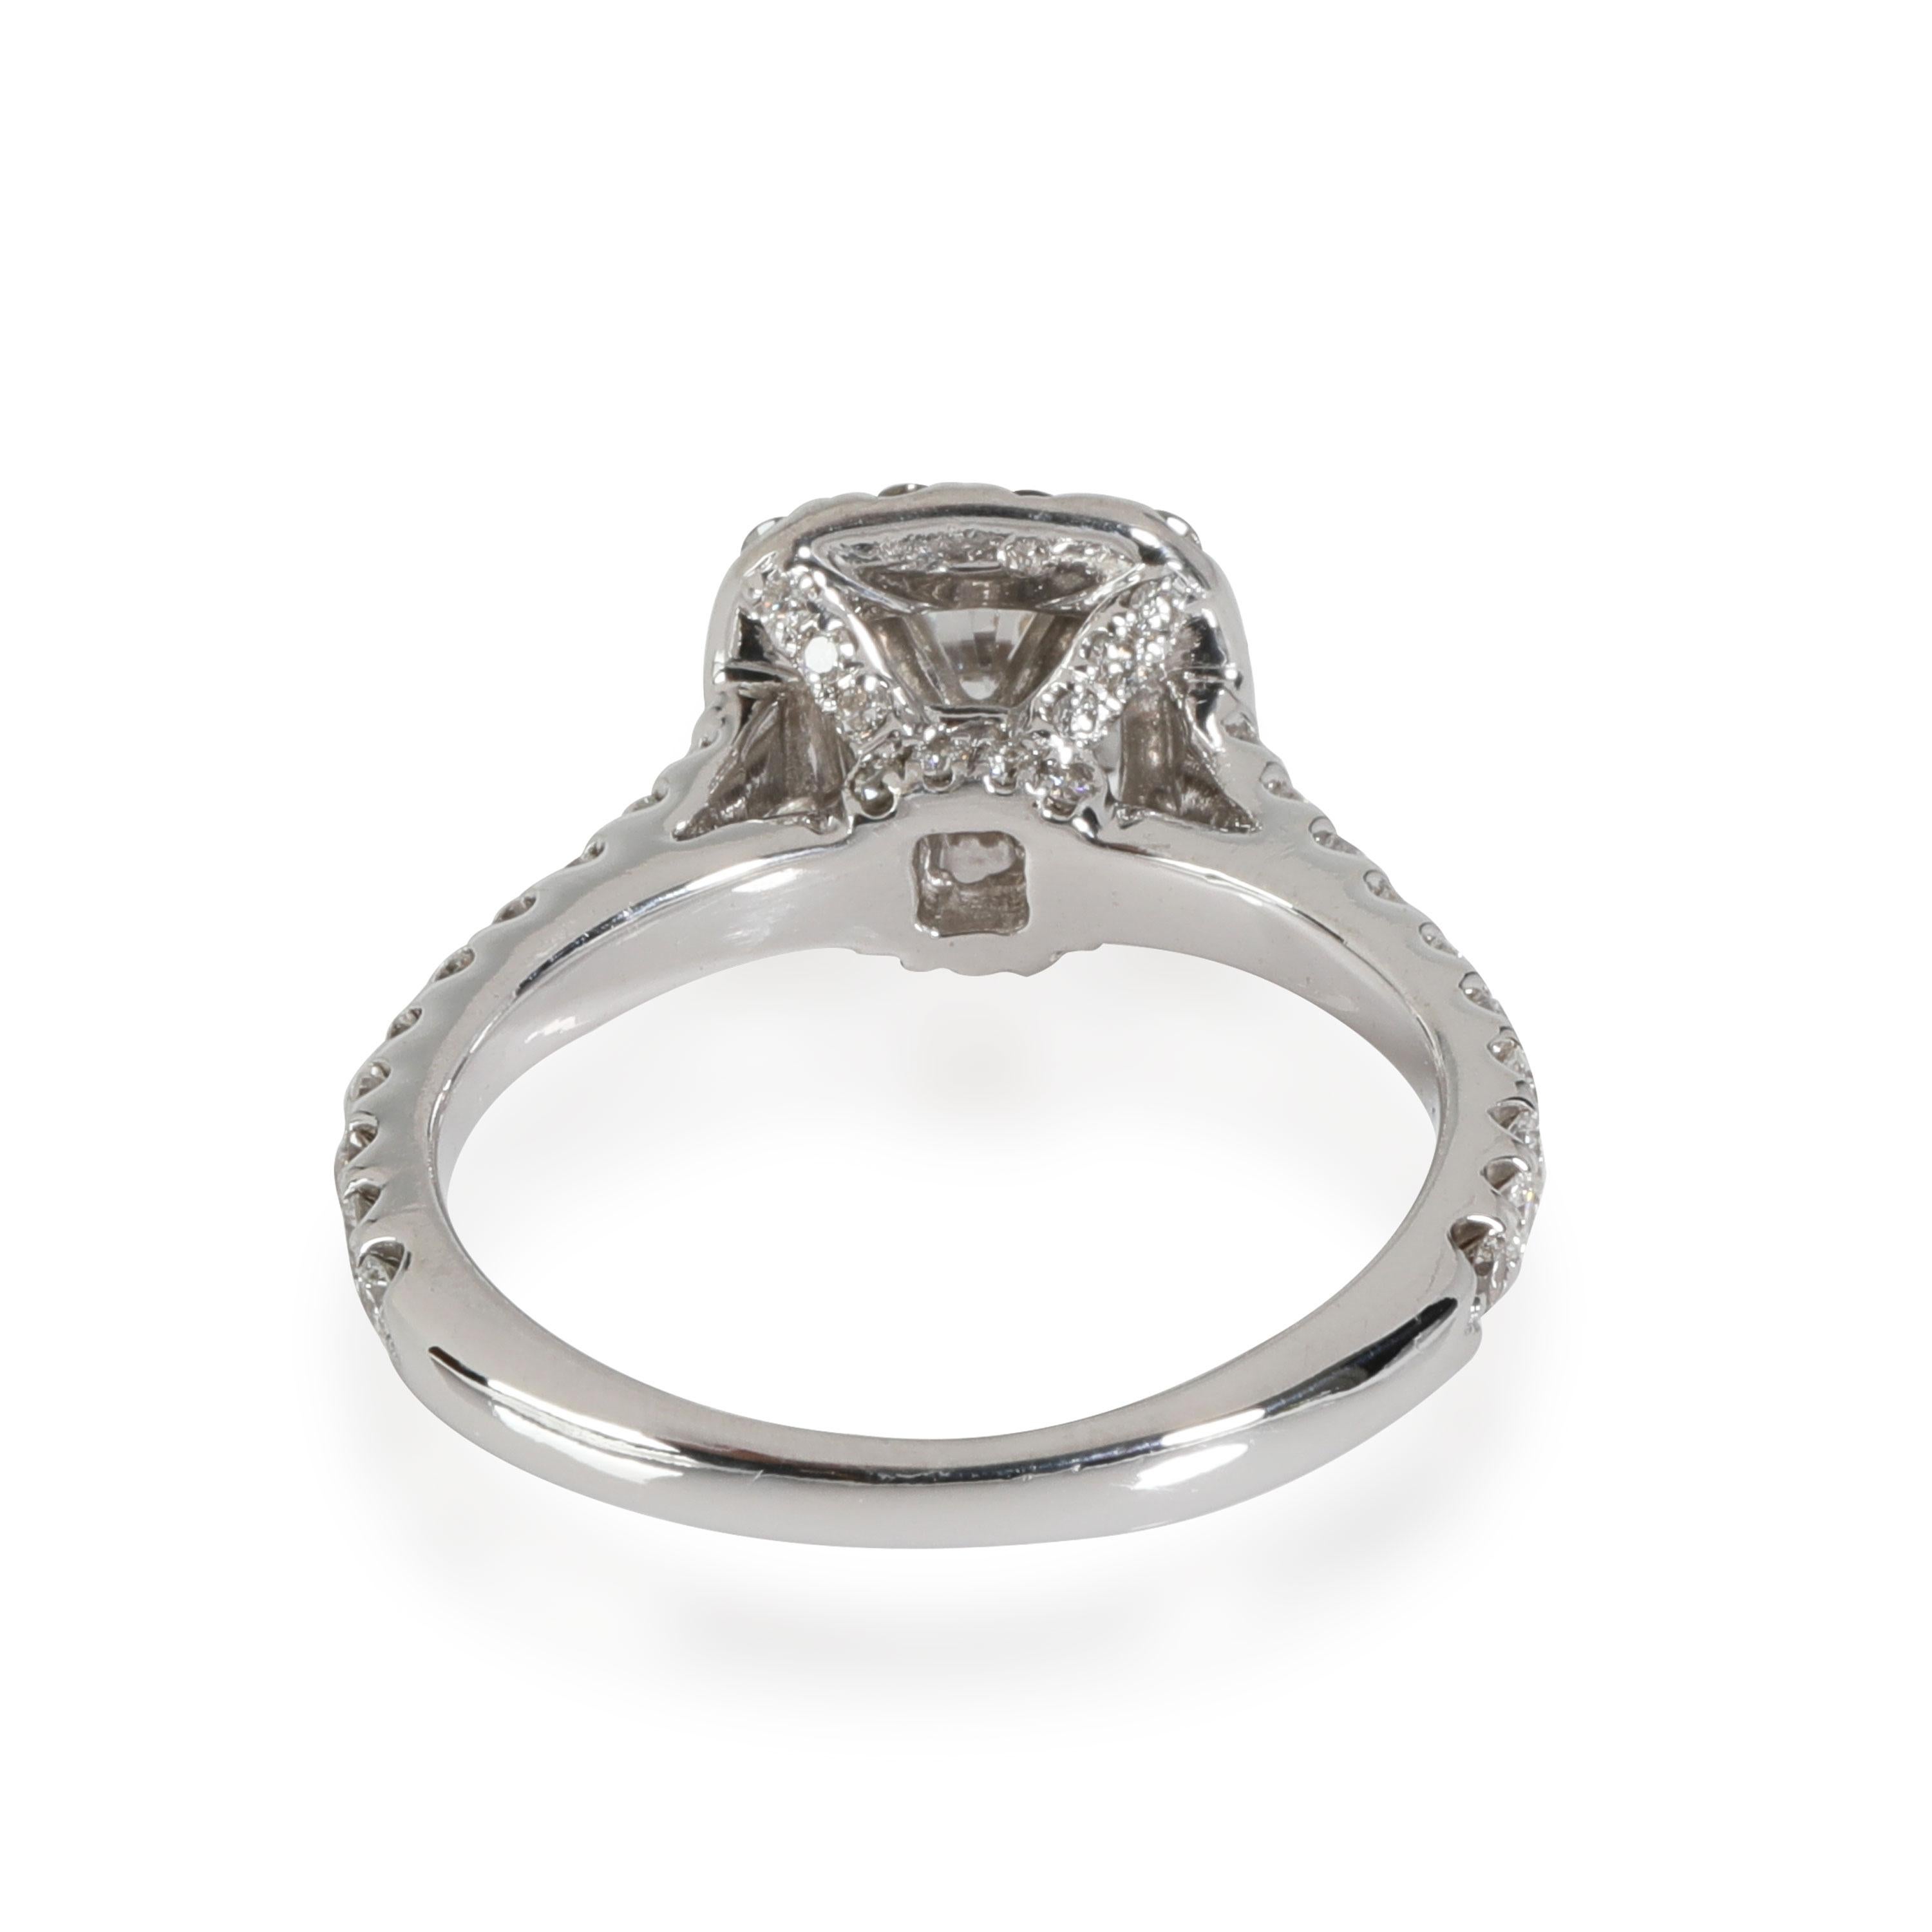 Neil Lane Diamond  Engagement Ring in 14k White Gold I I1 1.15 CTW

PRIMARY DETAILS
SKU: 116416
Listing Title: Neil Lane Diamond  Engagement Ring in 14k White Gold I I1 1.15 CTW
Condition Description: Retails for 4350 USD. In excellent condition and